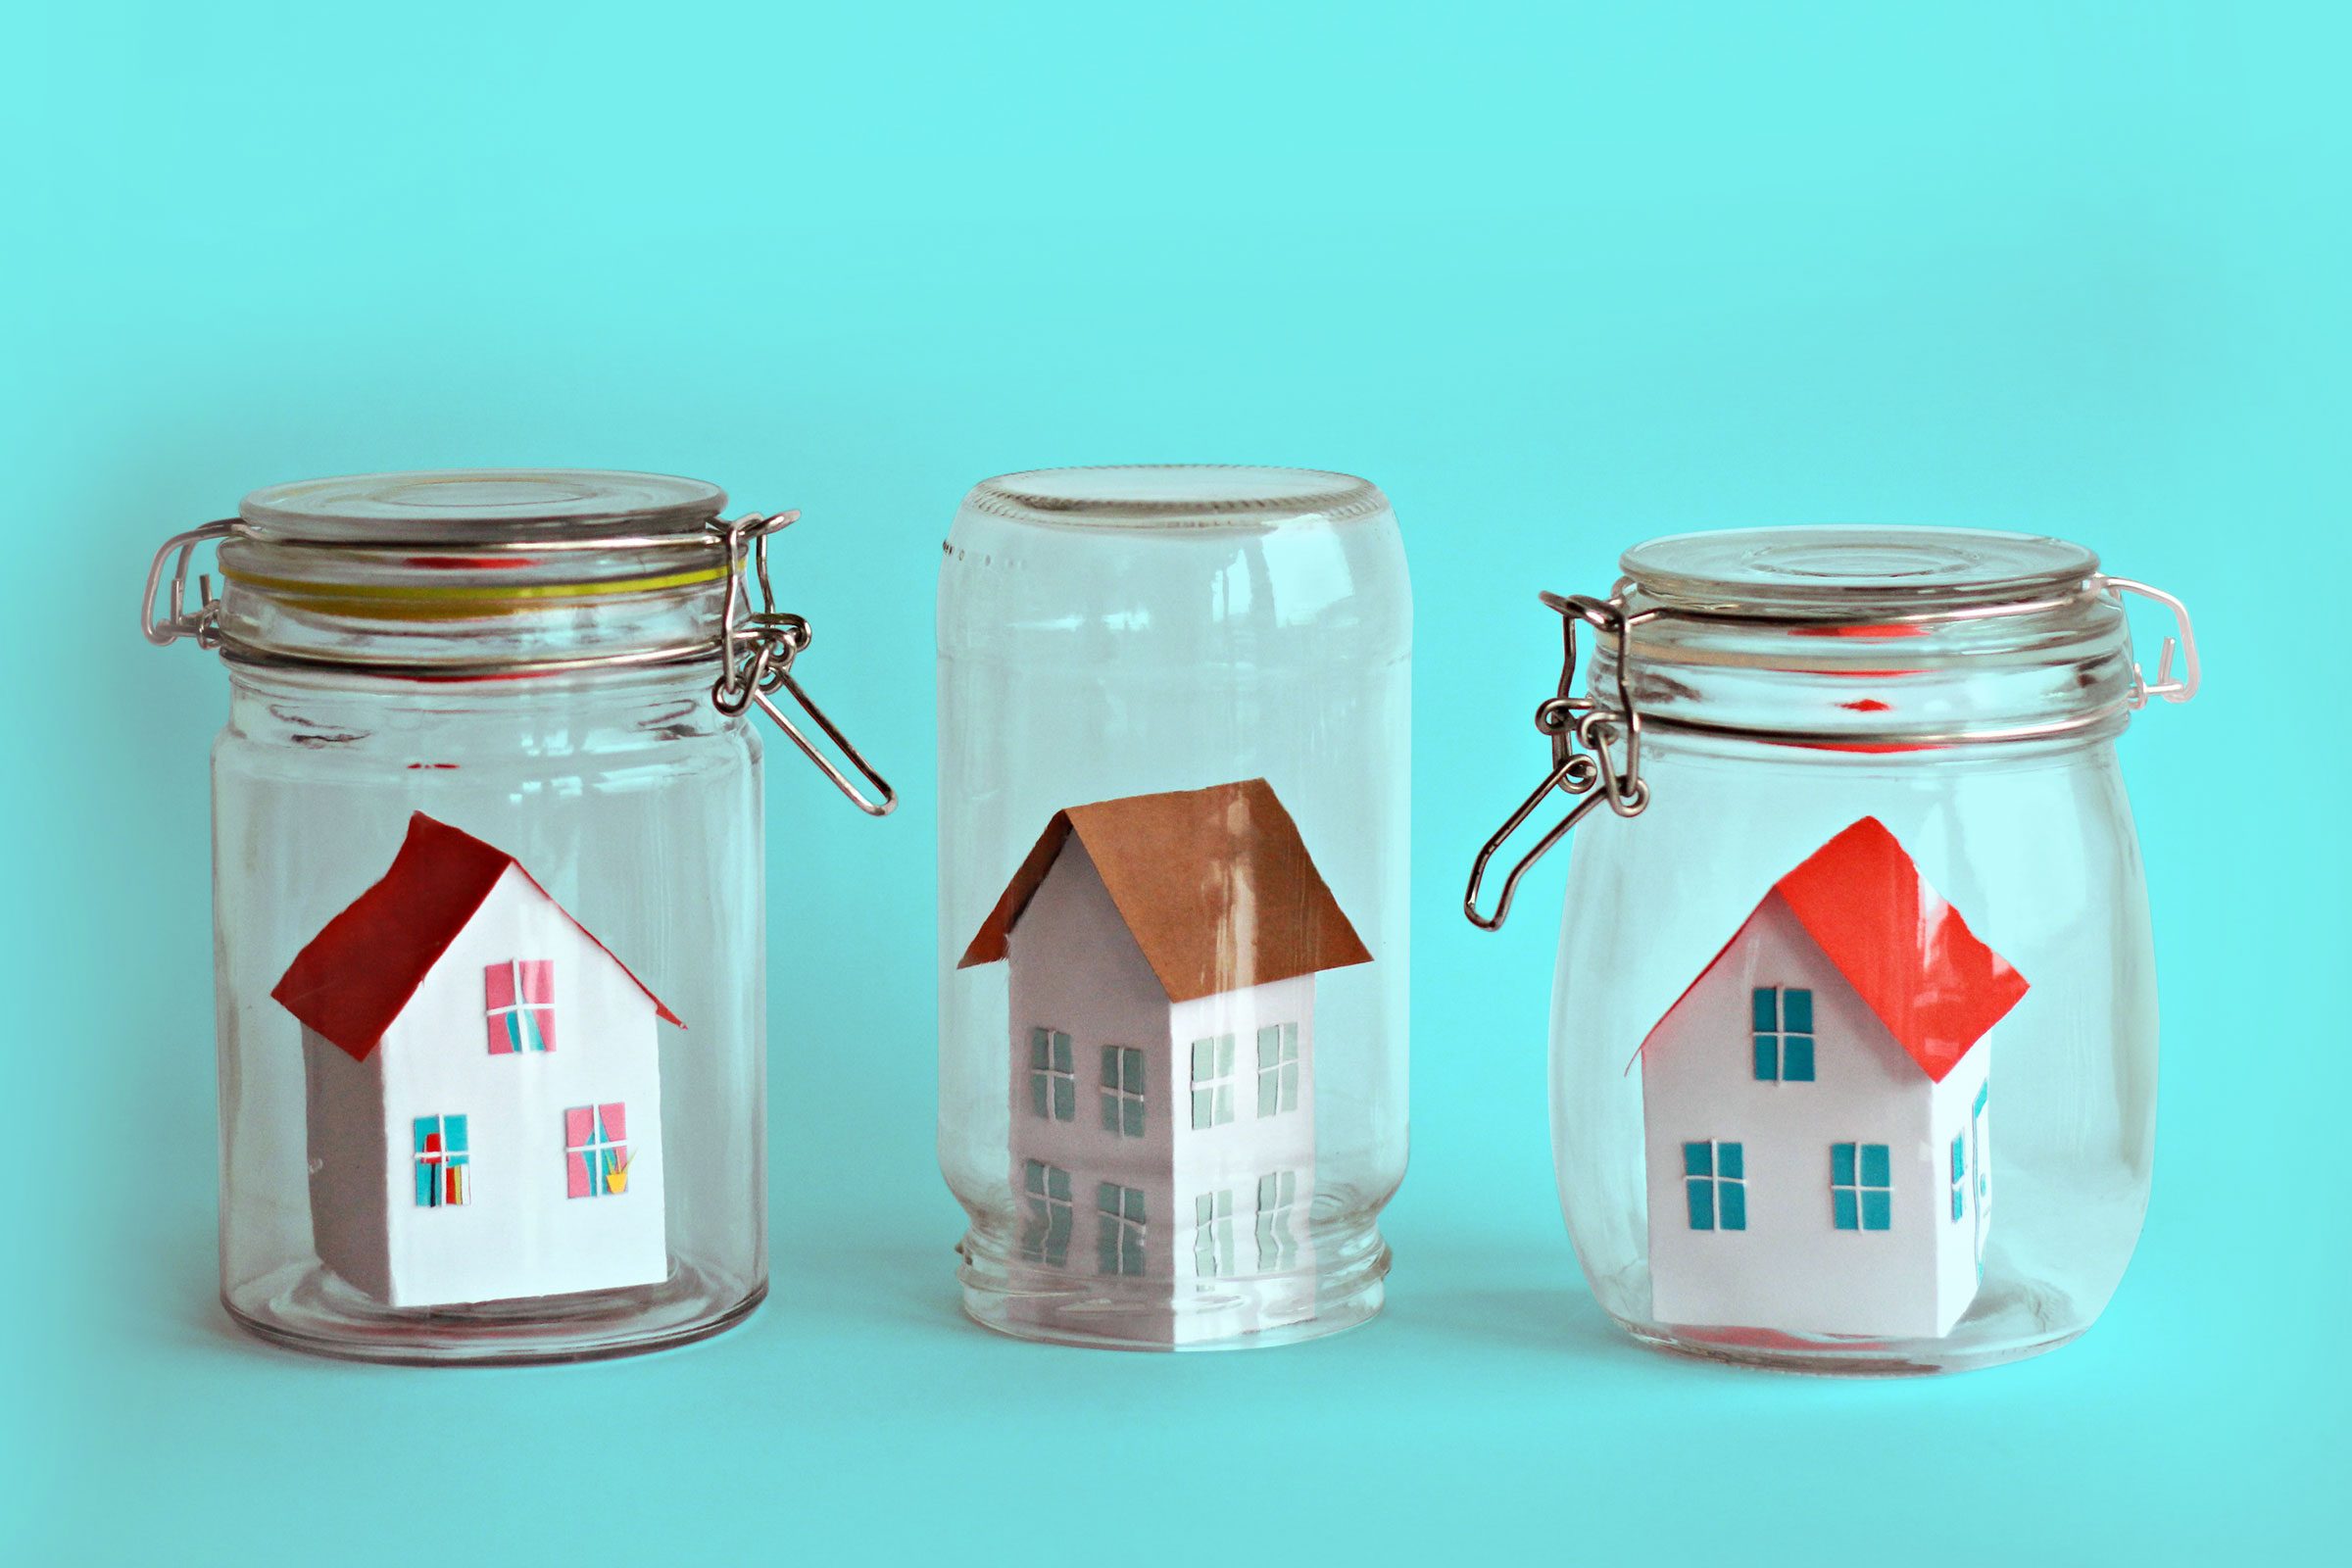 three houses in glass jars on teal background